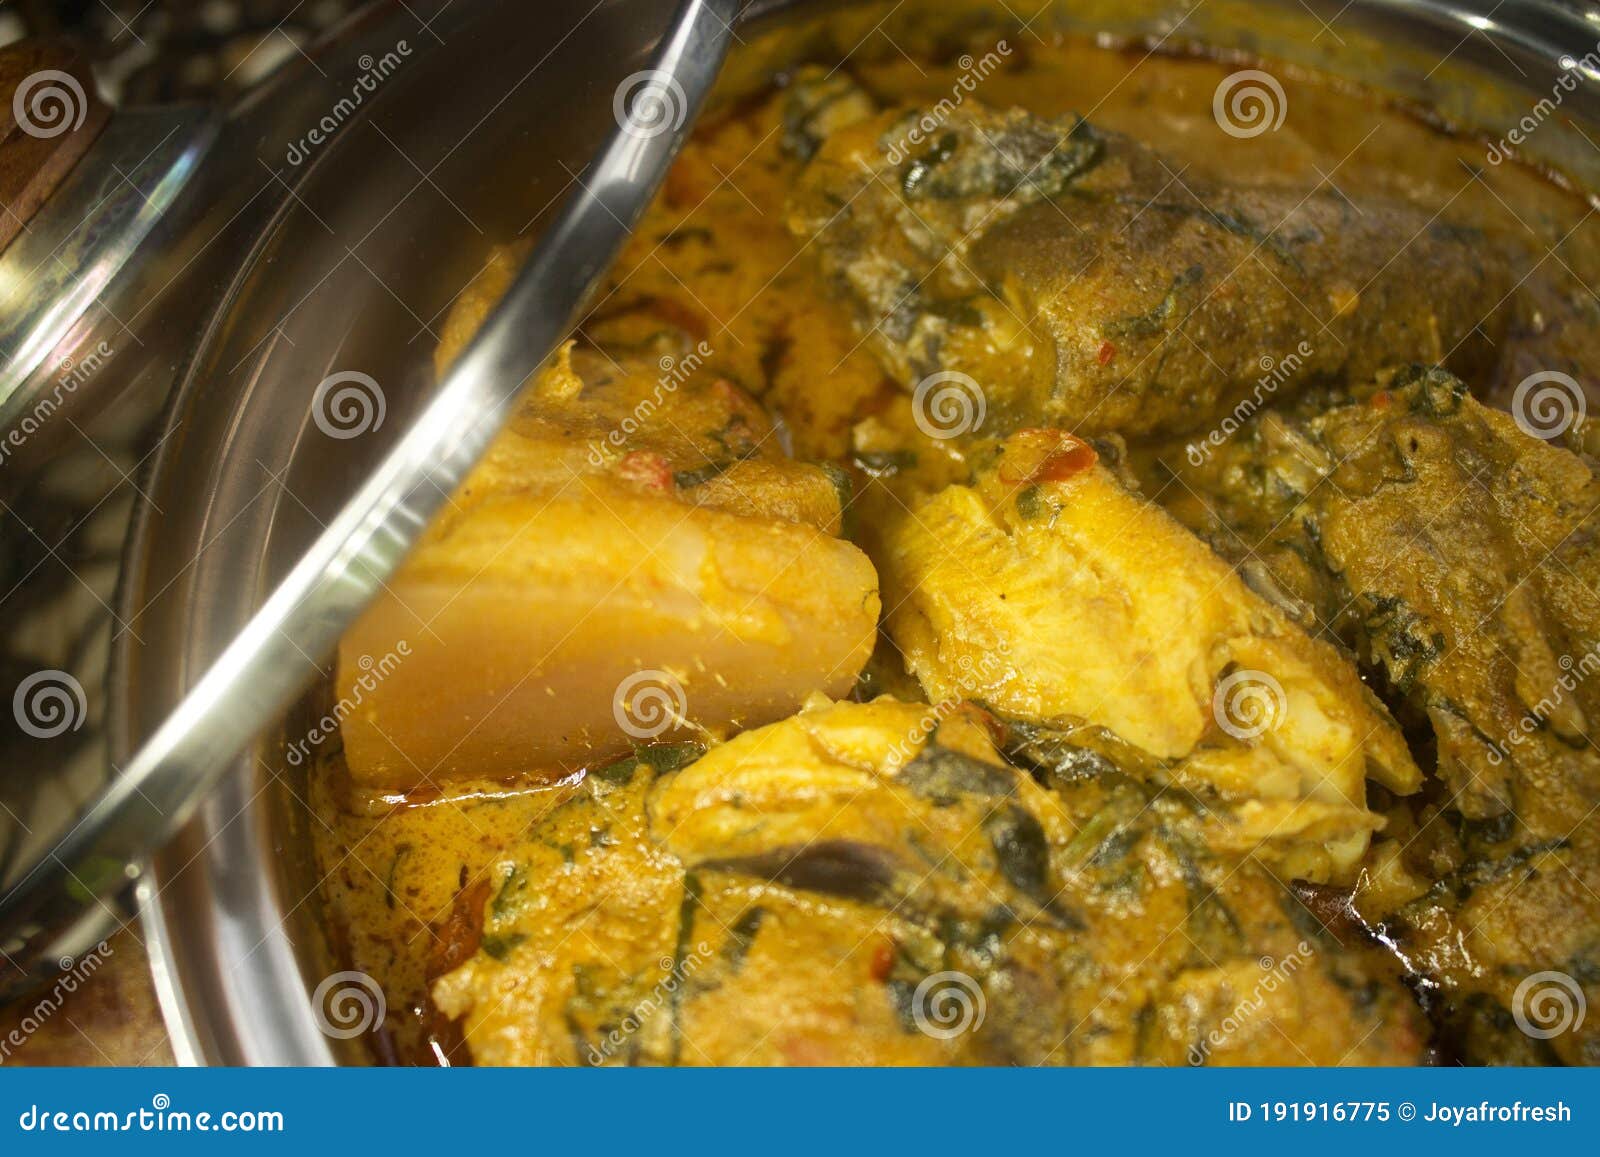 a close up view of assorted meat in a pot of nigerian soup